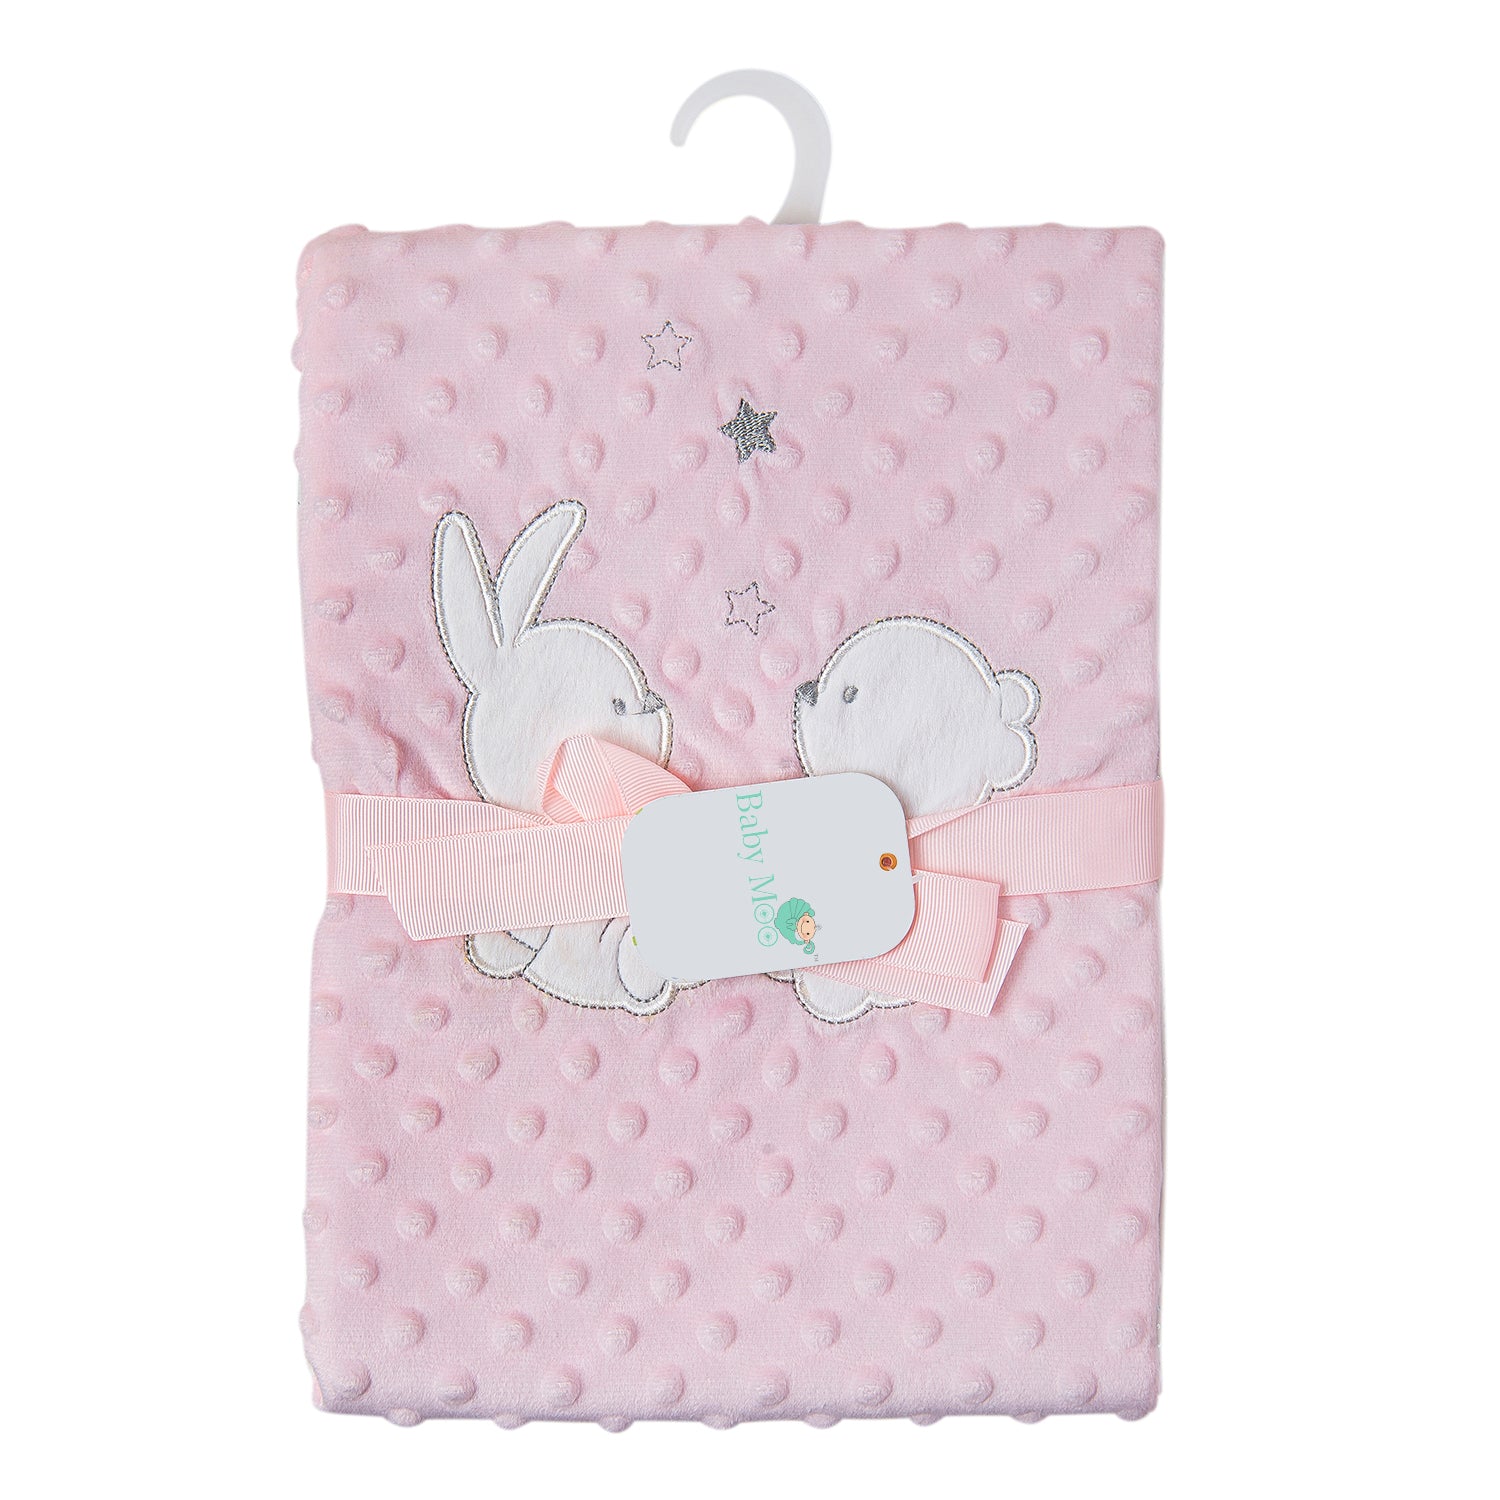 Baby Moo Unicorn Embroidery Soft Reversible Bubble Blanket Pink